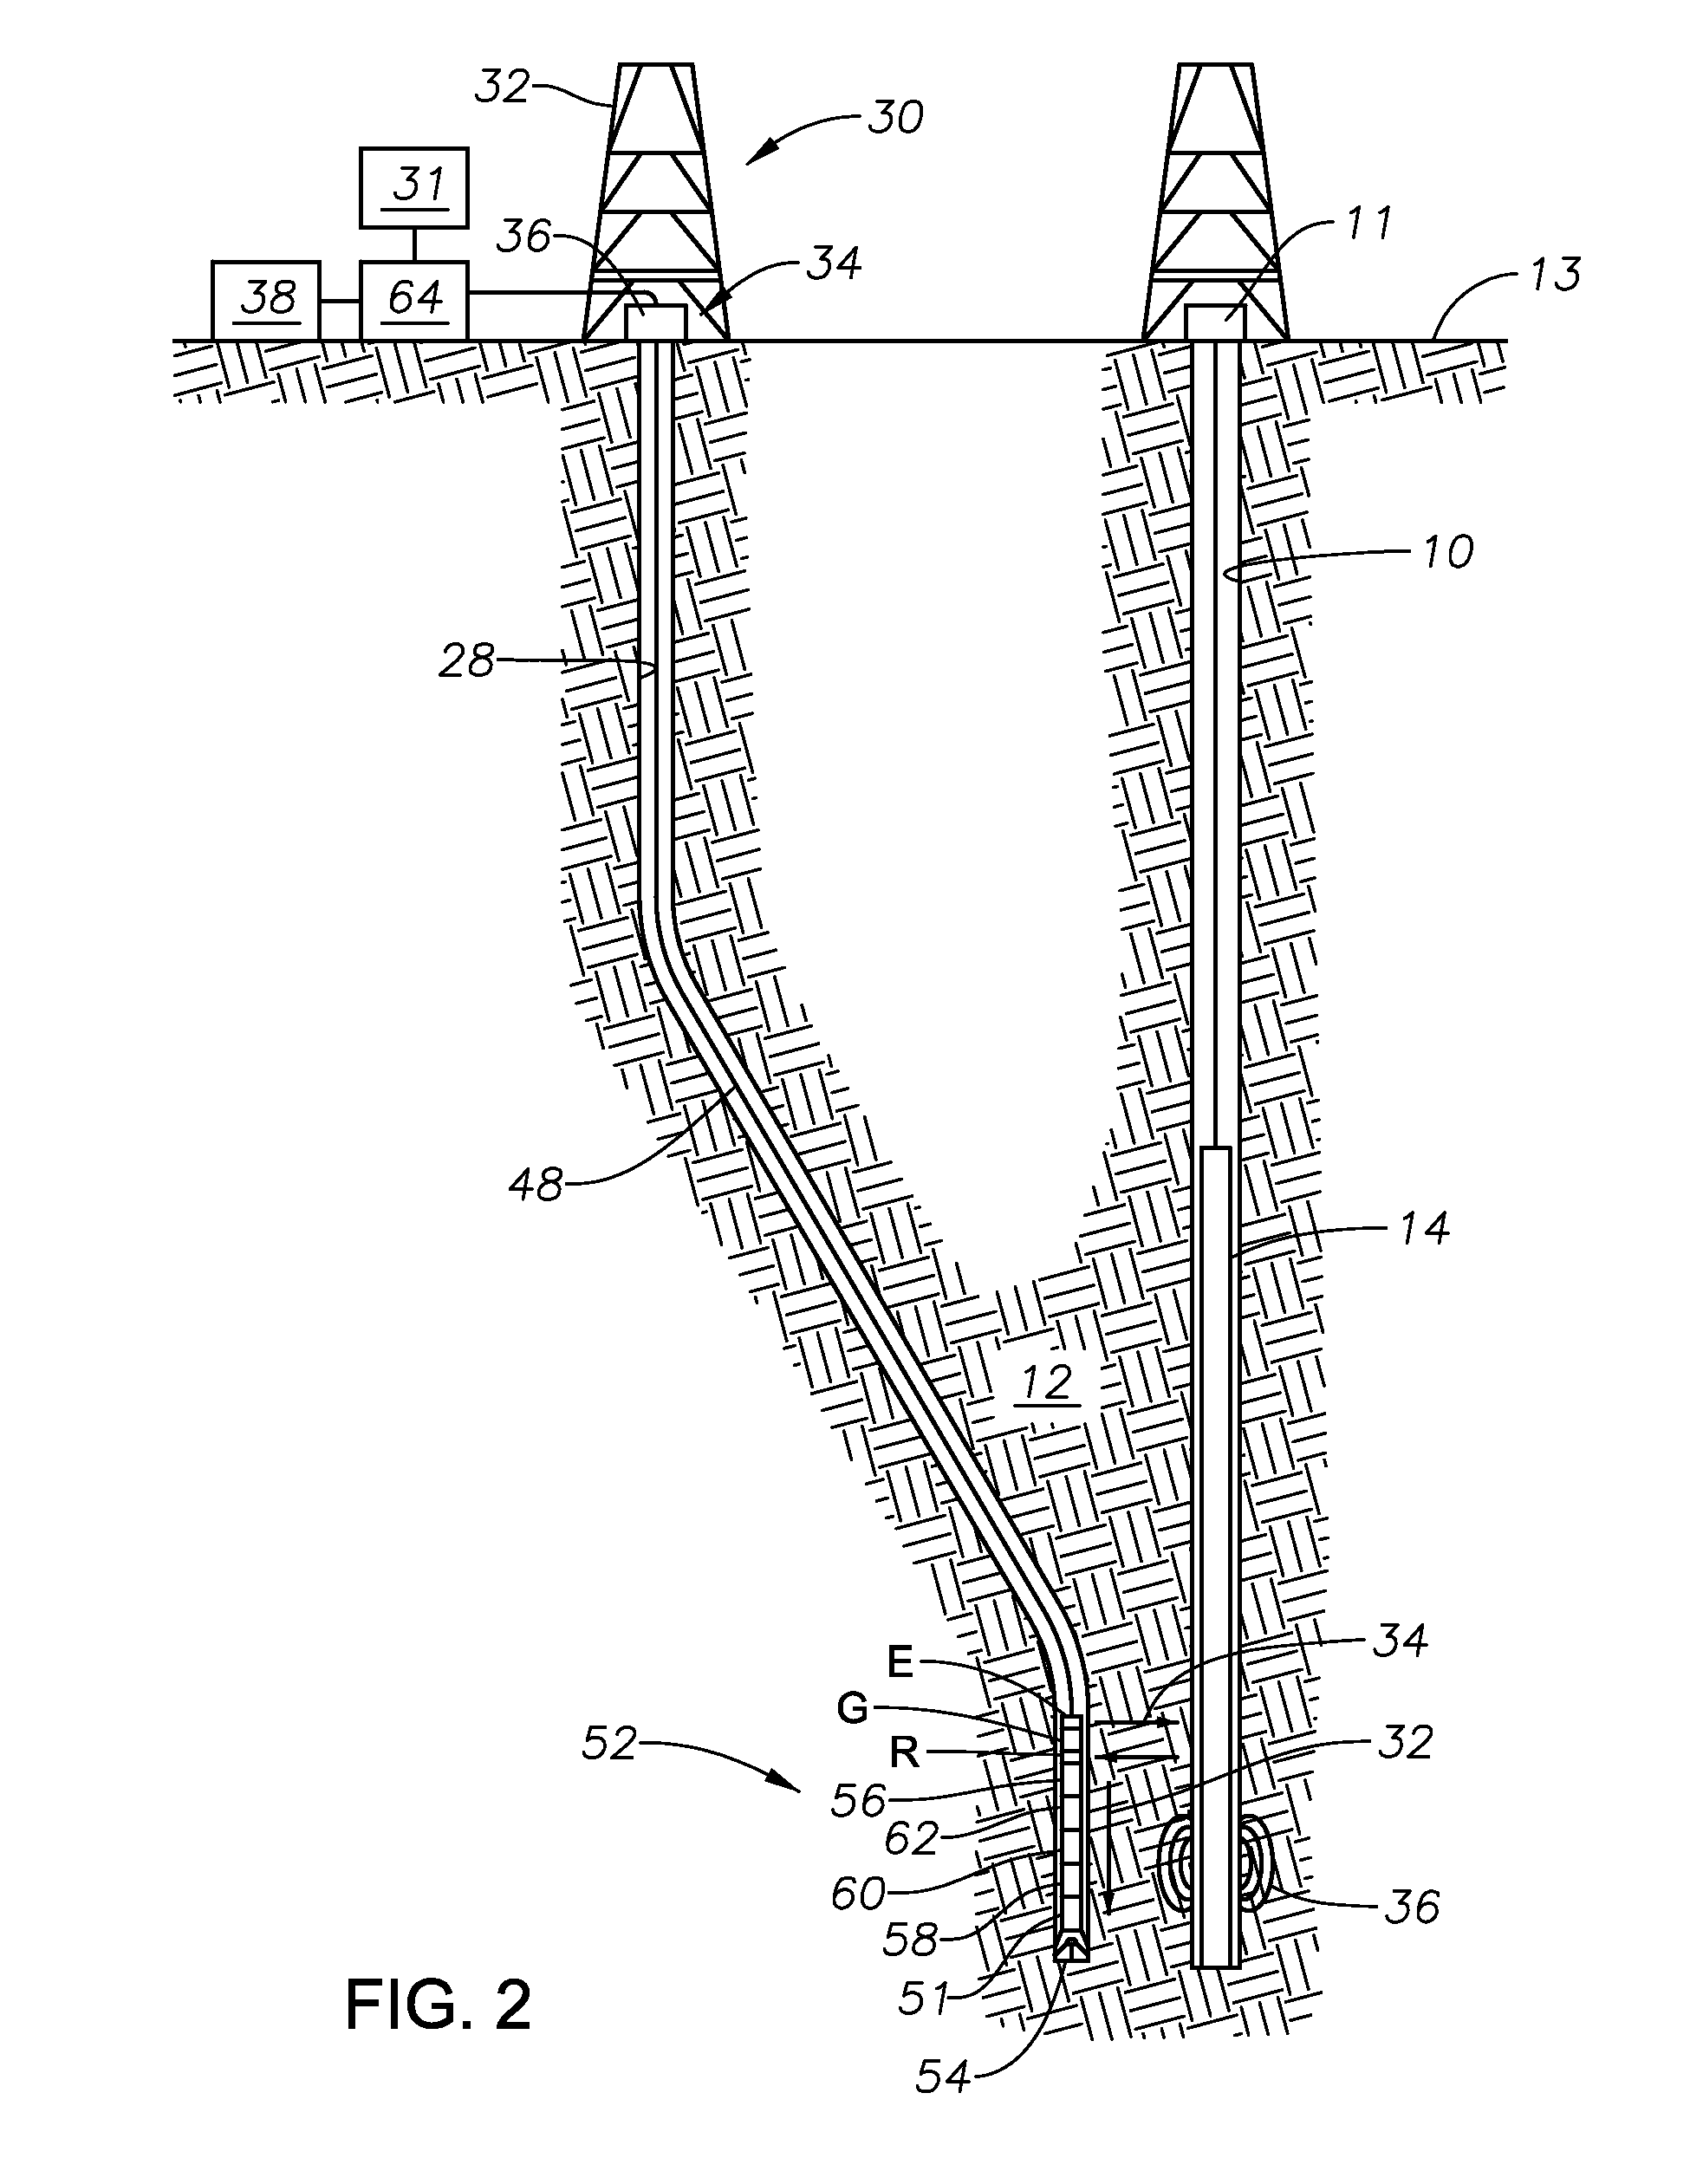 Gradient-based single well ranging system for sagd application